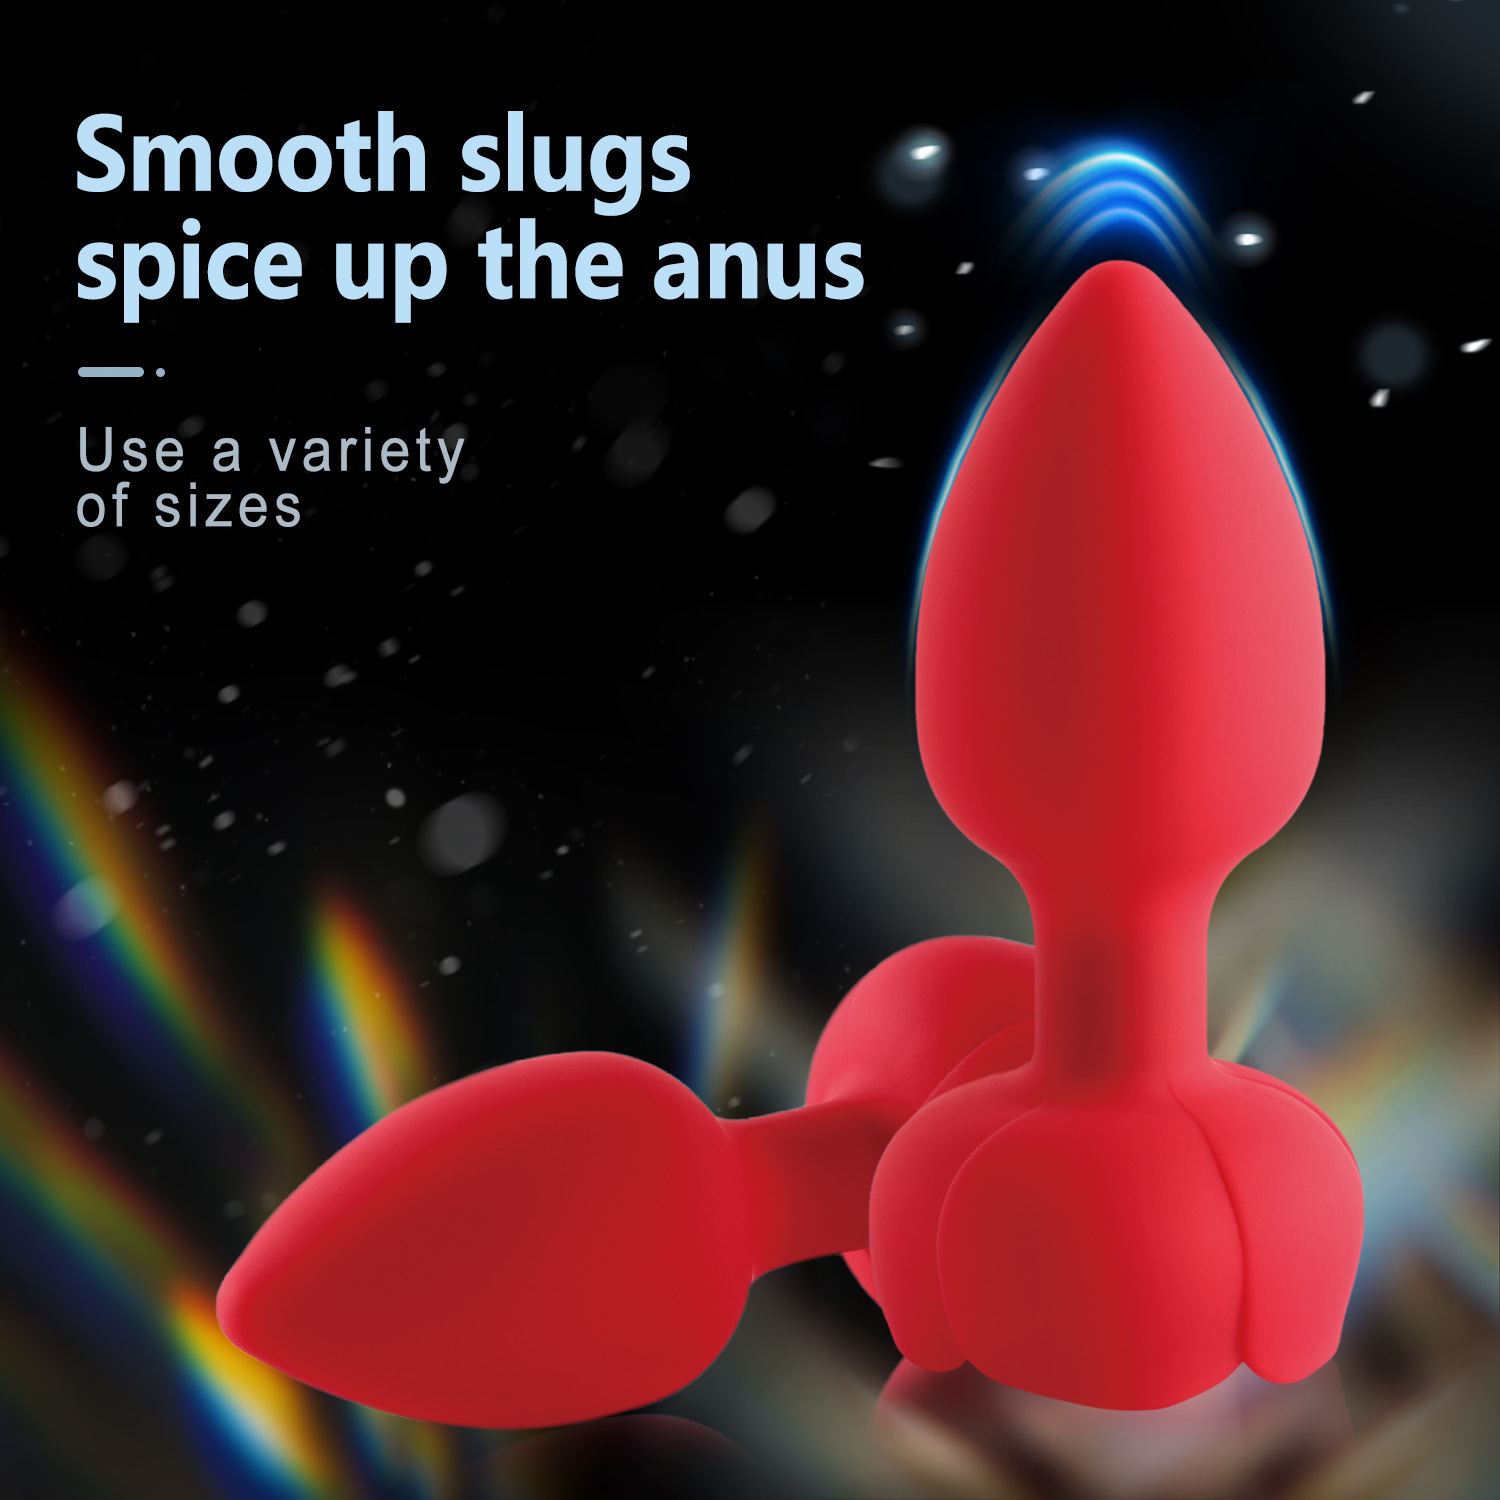 6.Red--Colorful glowing Adult Sex Toys